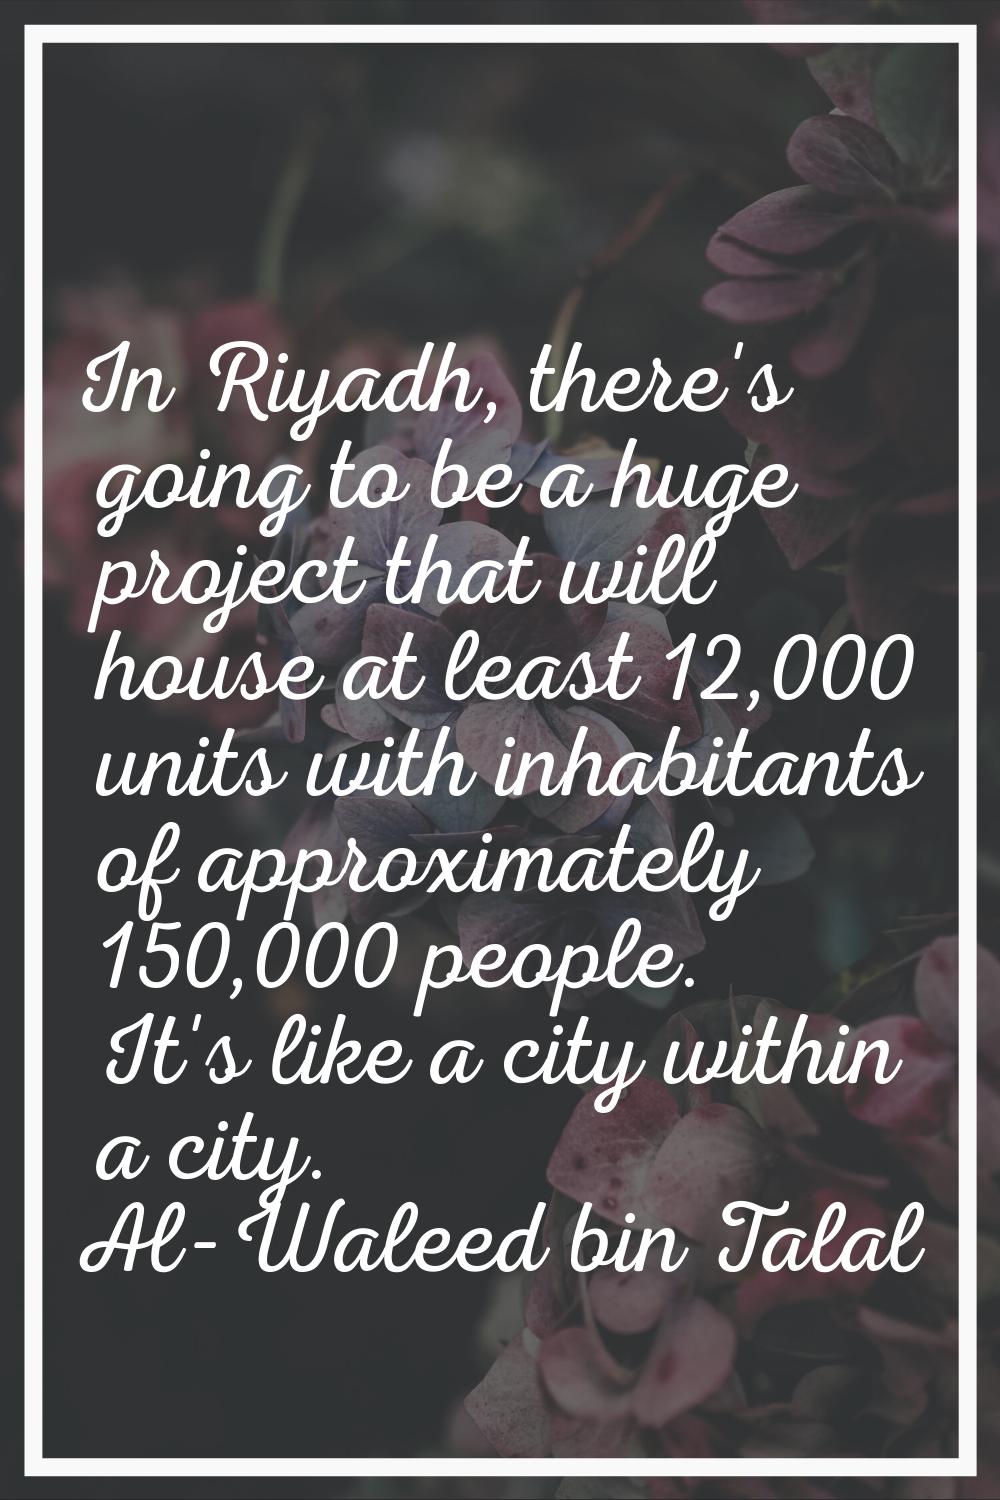 In Riyadh, there's going to be a huge project that will house at least 12,000 units with inhabitant